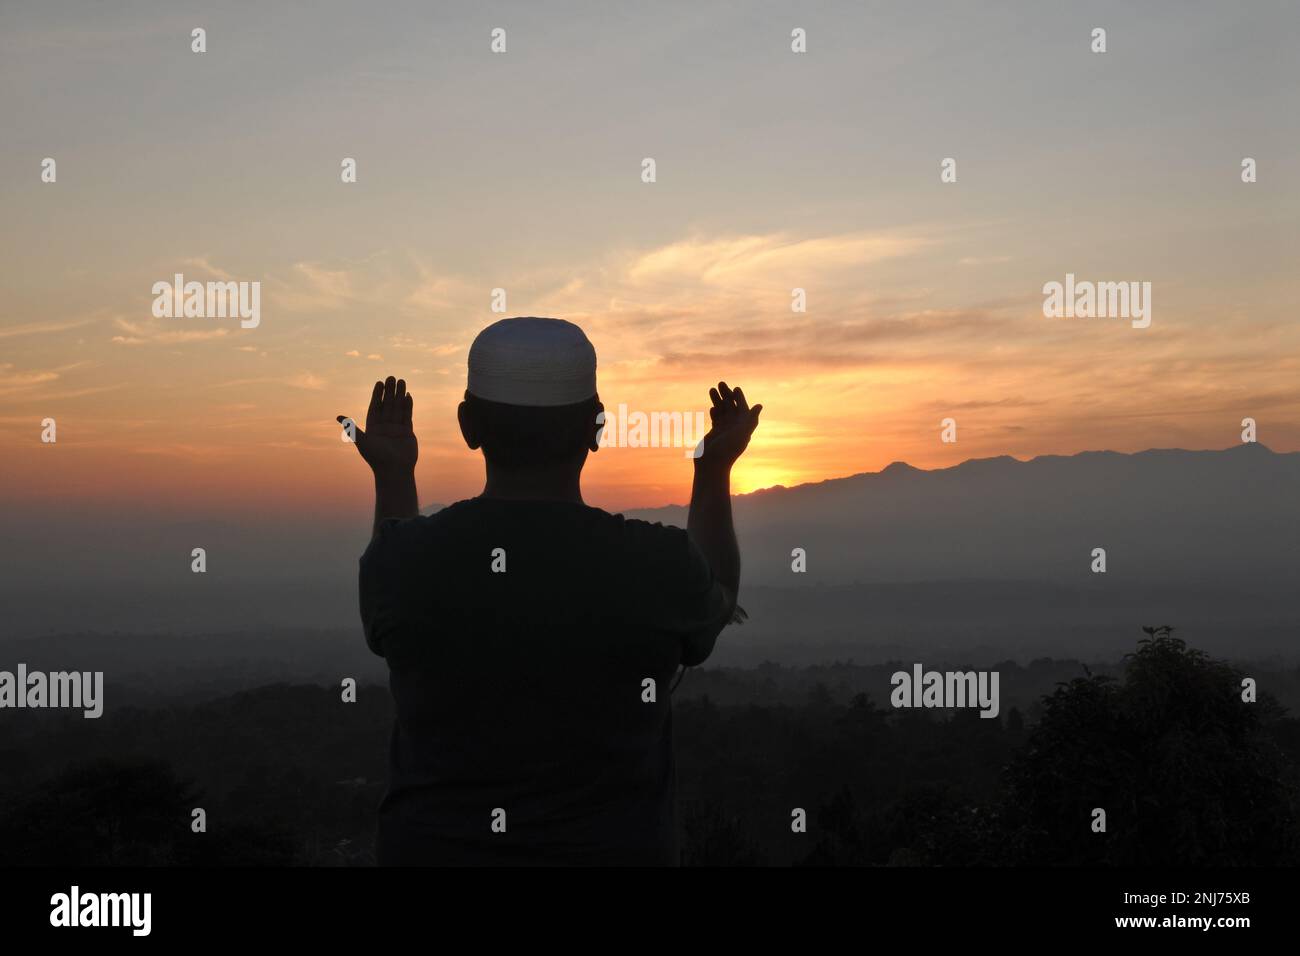 silhouette of a person on the sunset Stock Photo